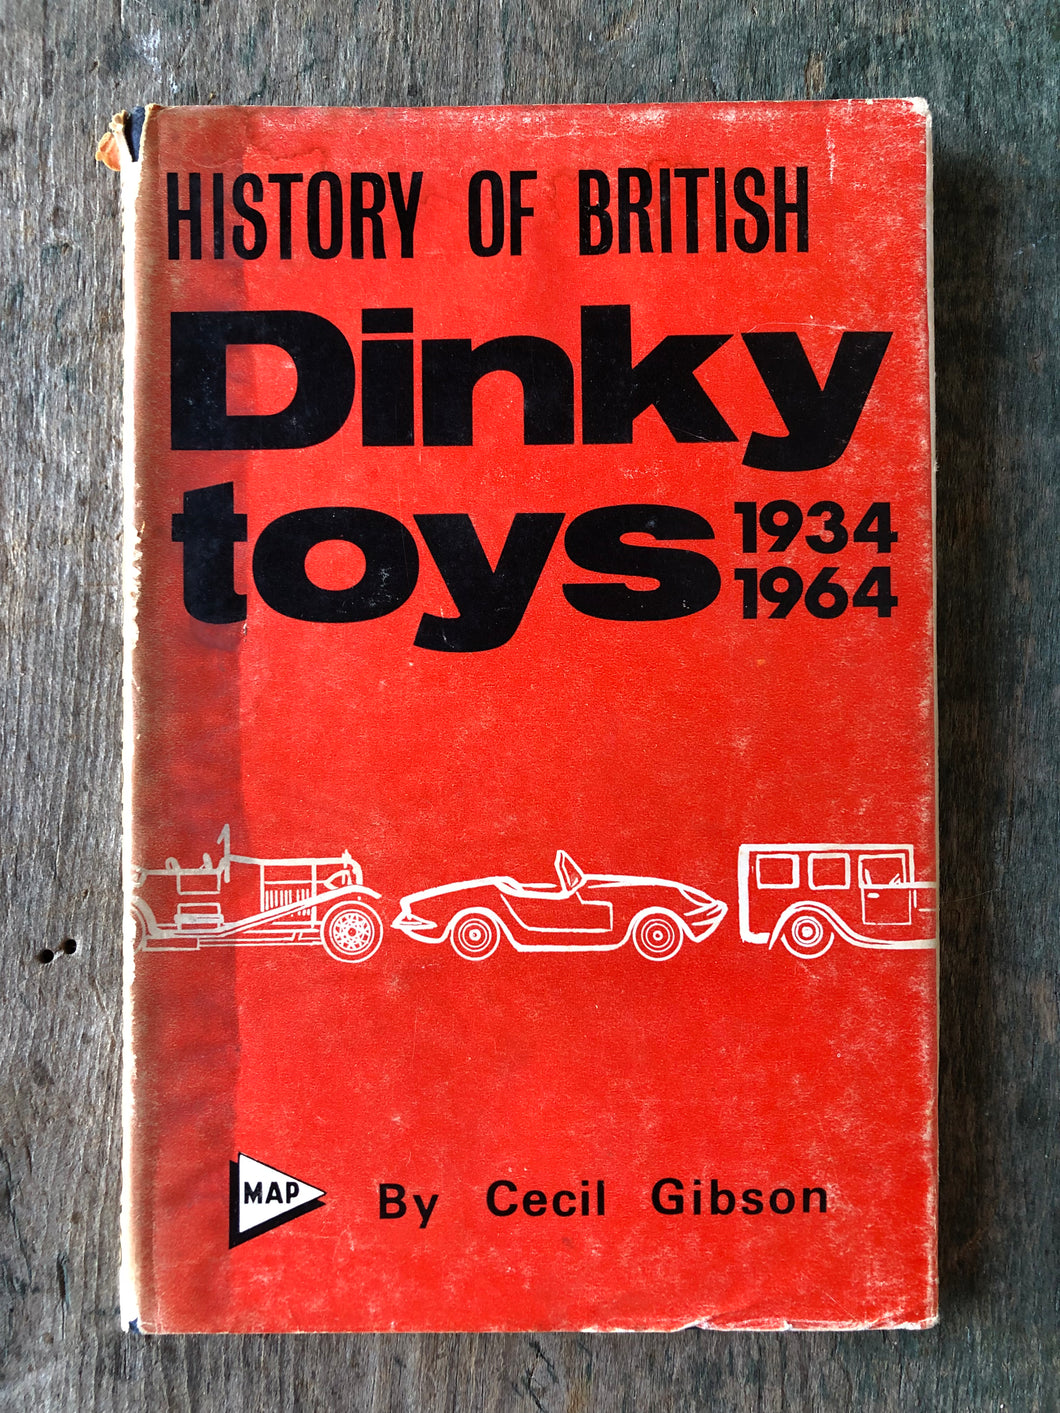 A History of British Dinky Toys: Model Car and Vehicle Issues 1934-1964 by Cecil Gibson